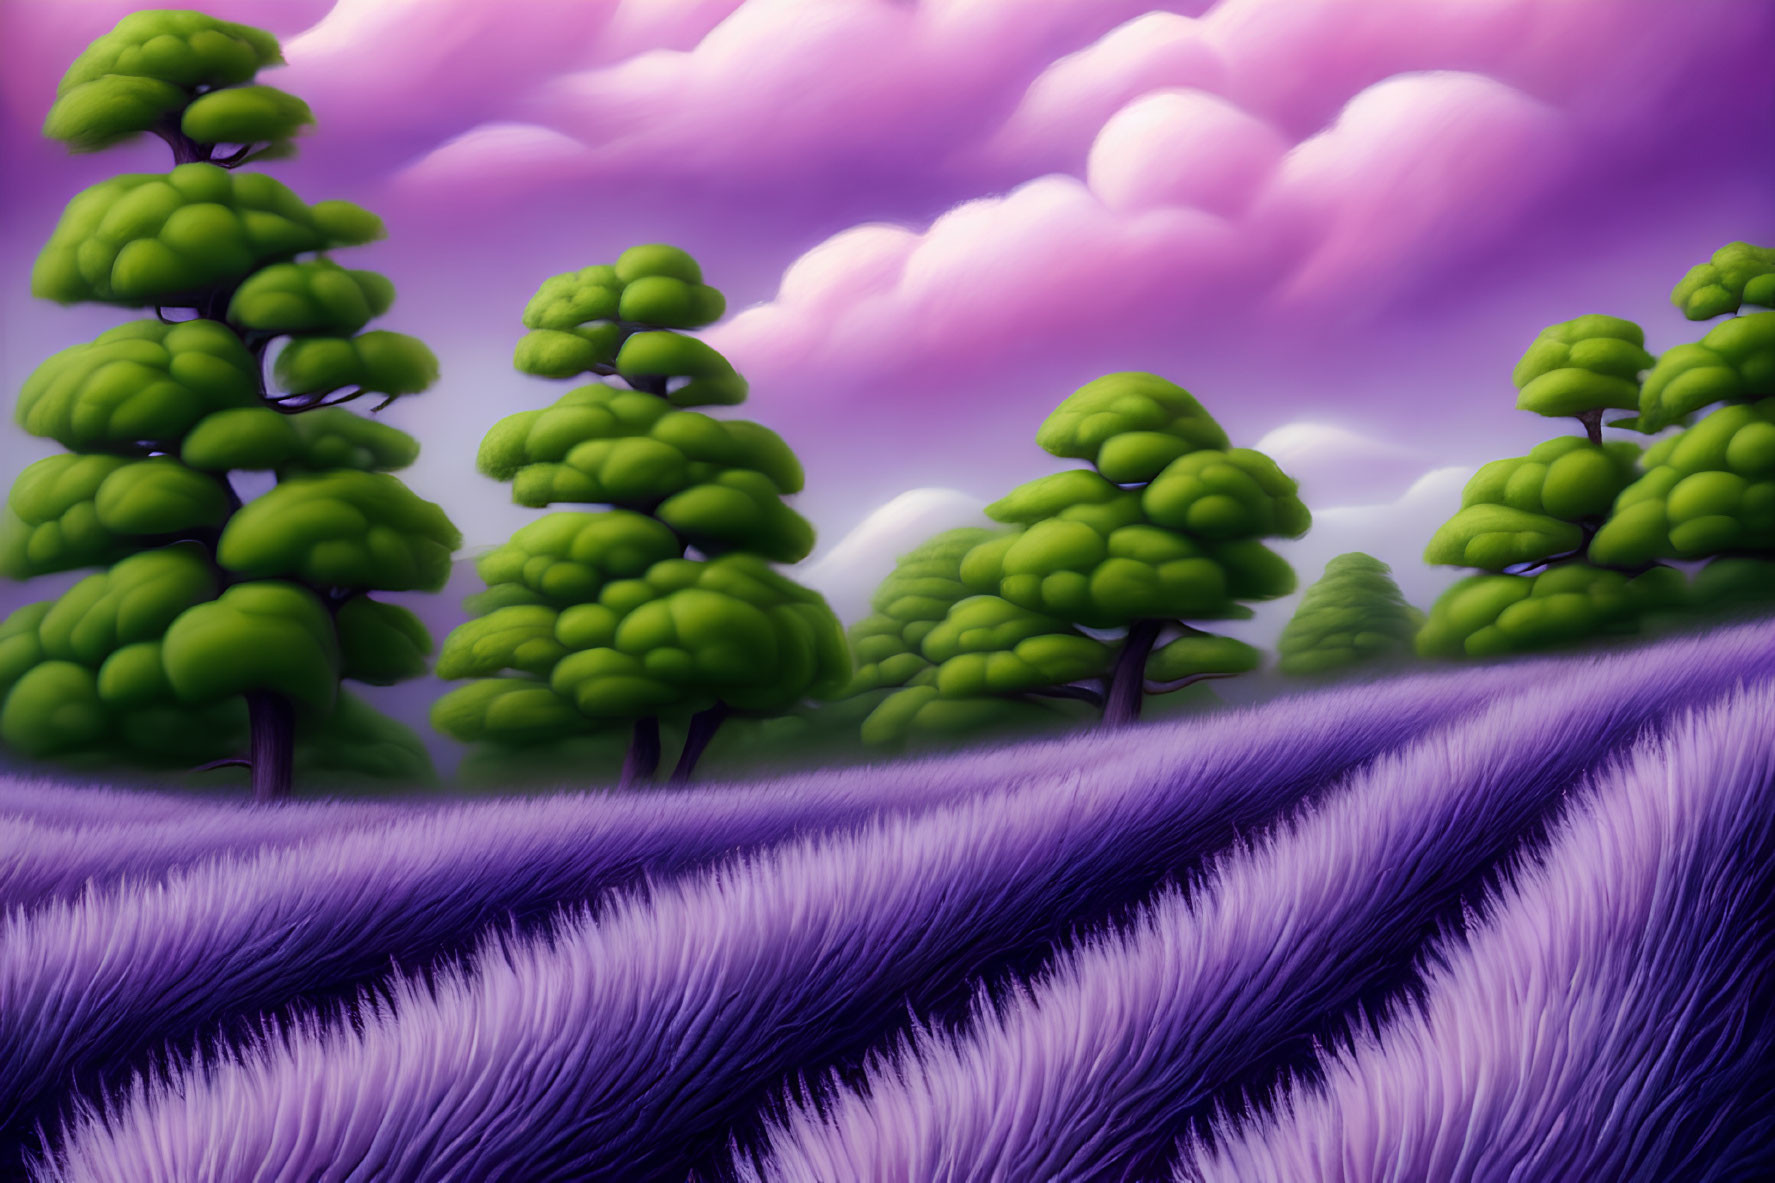 Vibrant fantasy landscape with purple skies, green trees, and purple grass